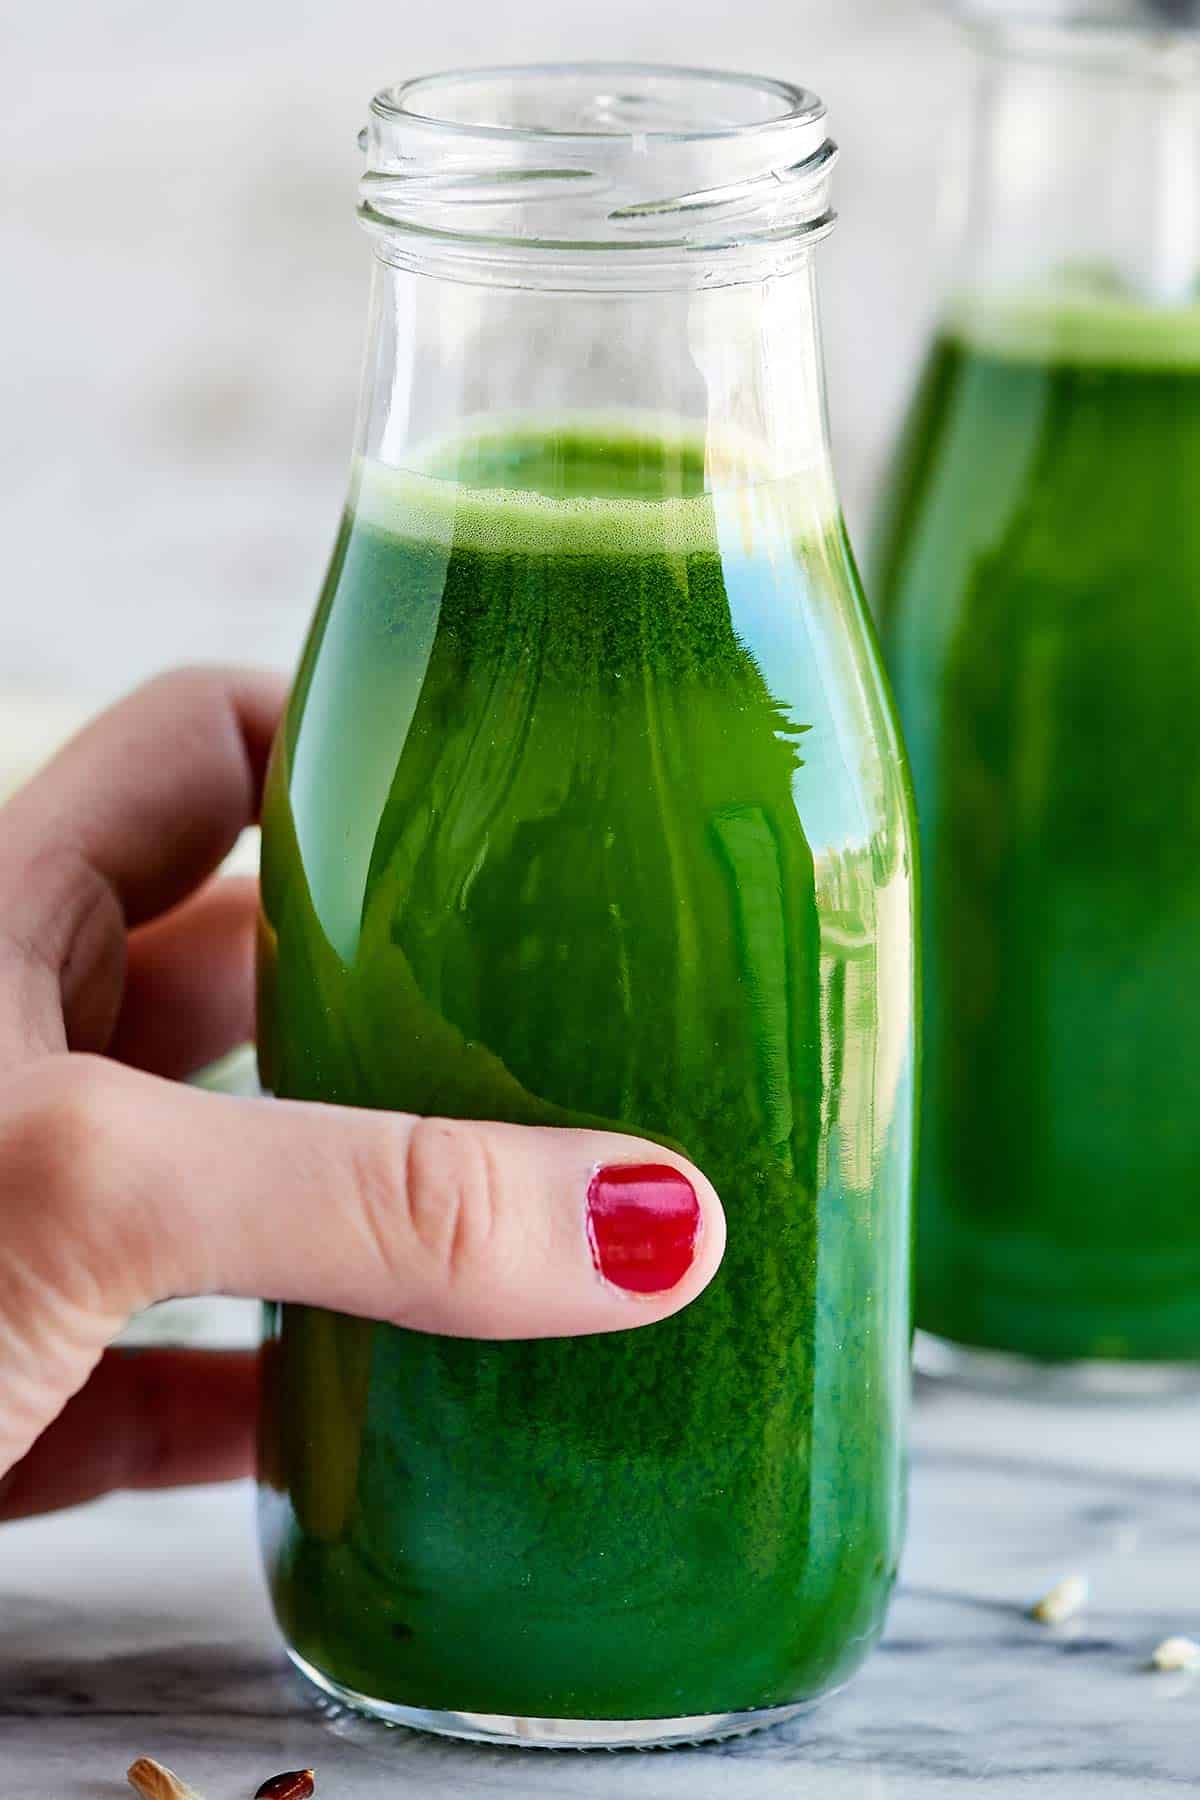 This Green Juice Recipe is packed with kale, cucumbers, celery, lemon, ginger, and apples! Loaded with fruits and veggies, this juice is healthy and delicious! showmetheyummy.com #greenjuice #vegan